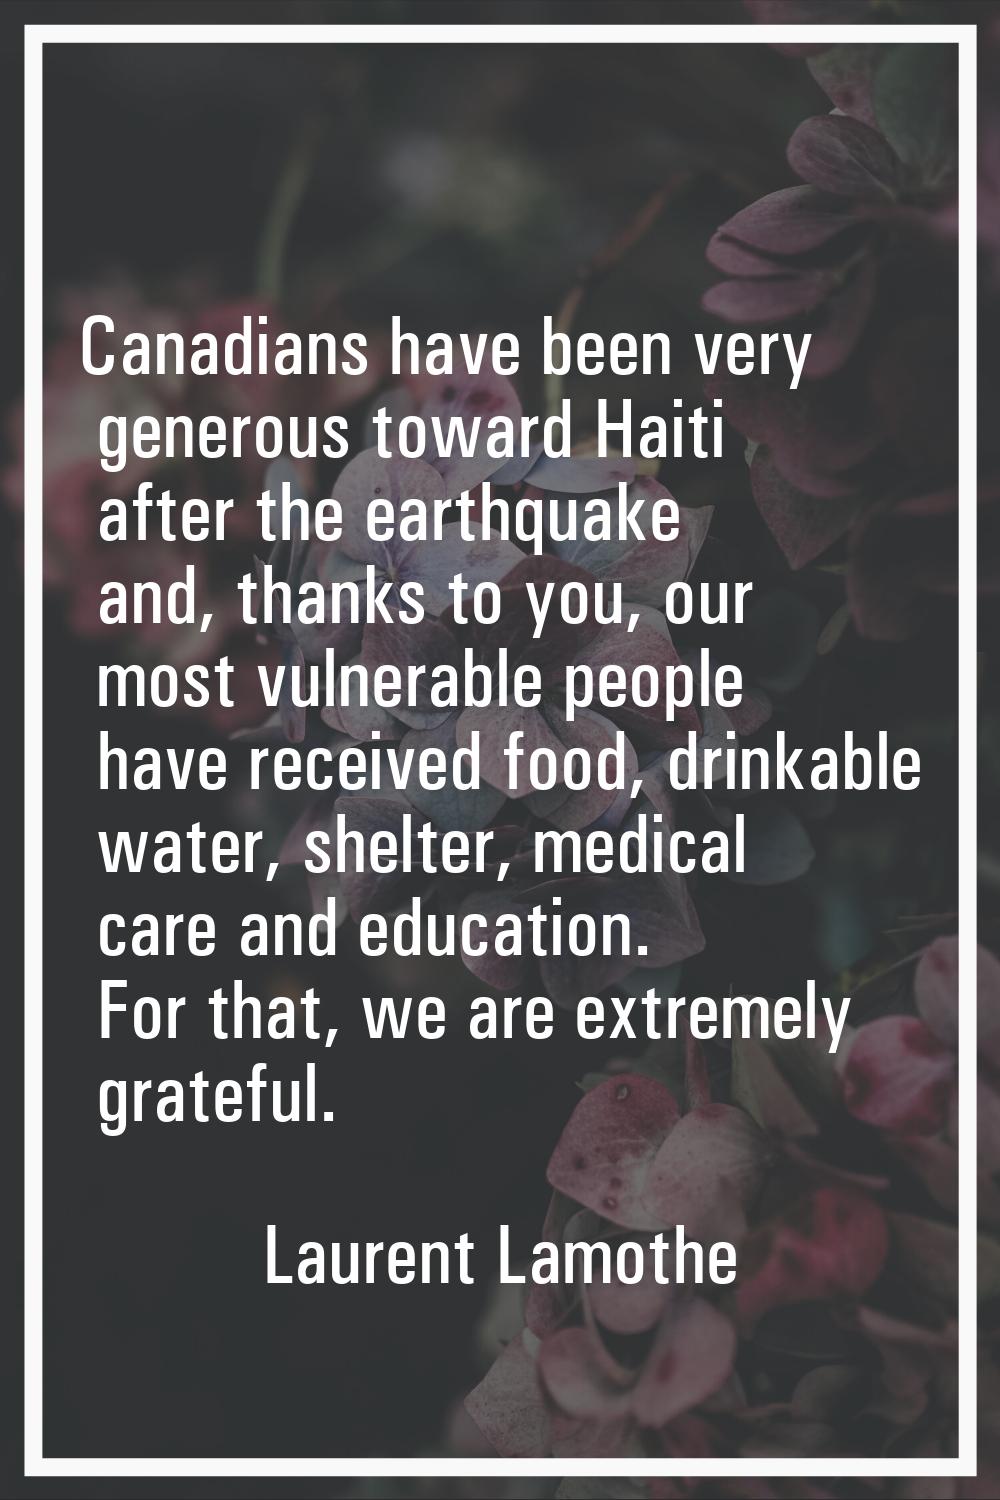 Canadians have been very generous toward Haiti after the earthquake and, thanks to you, our most vu